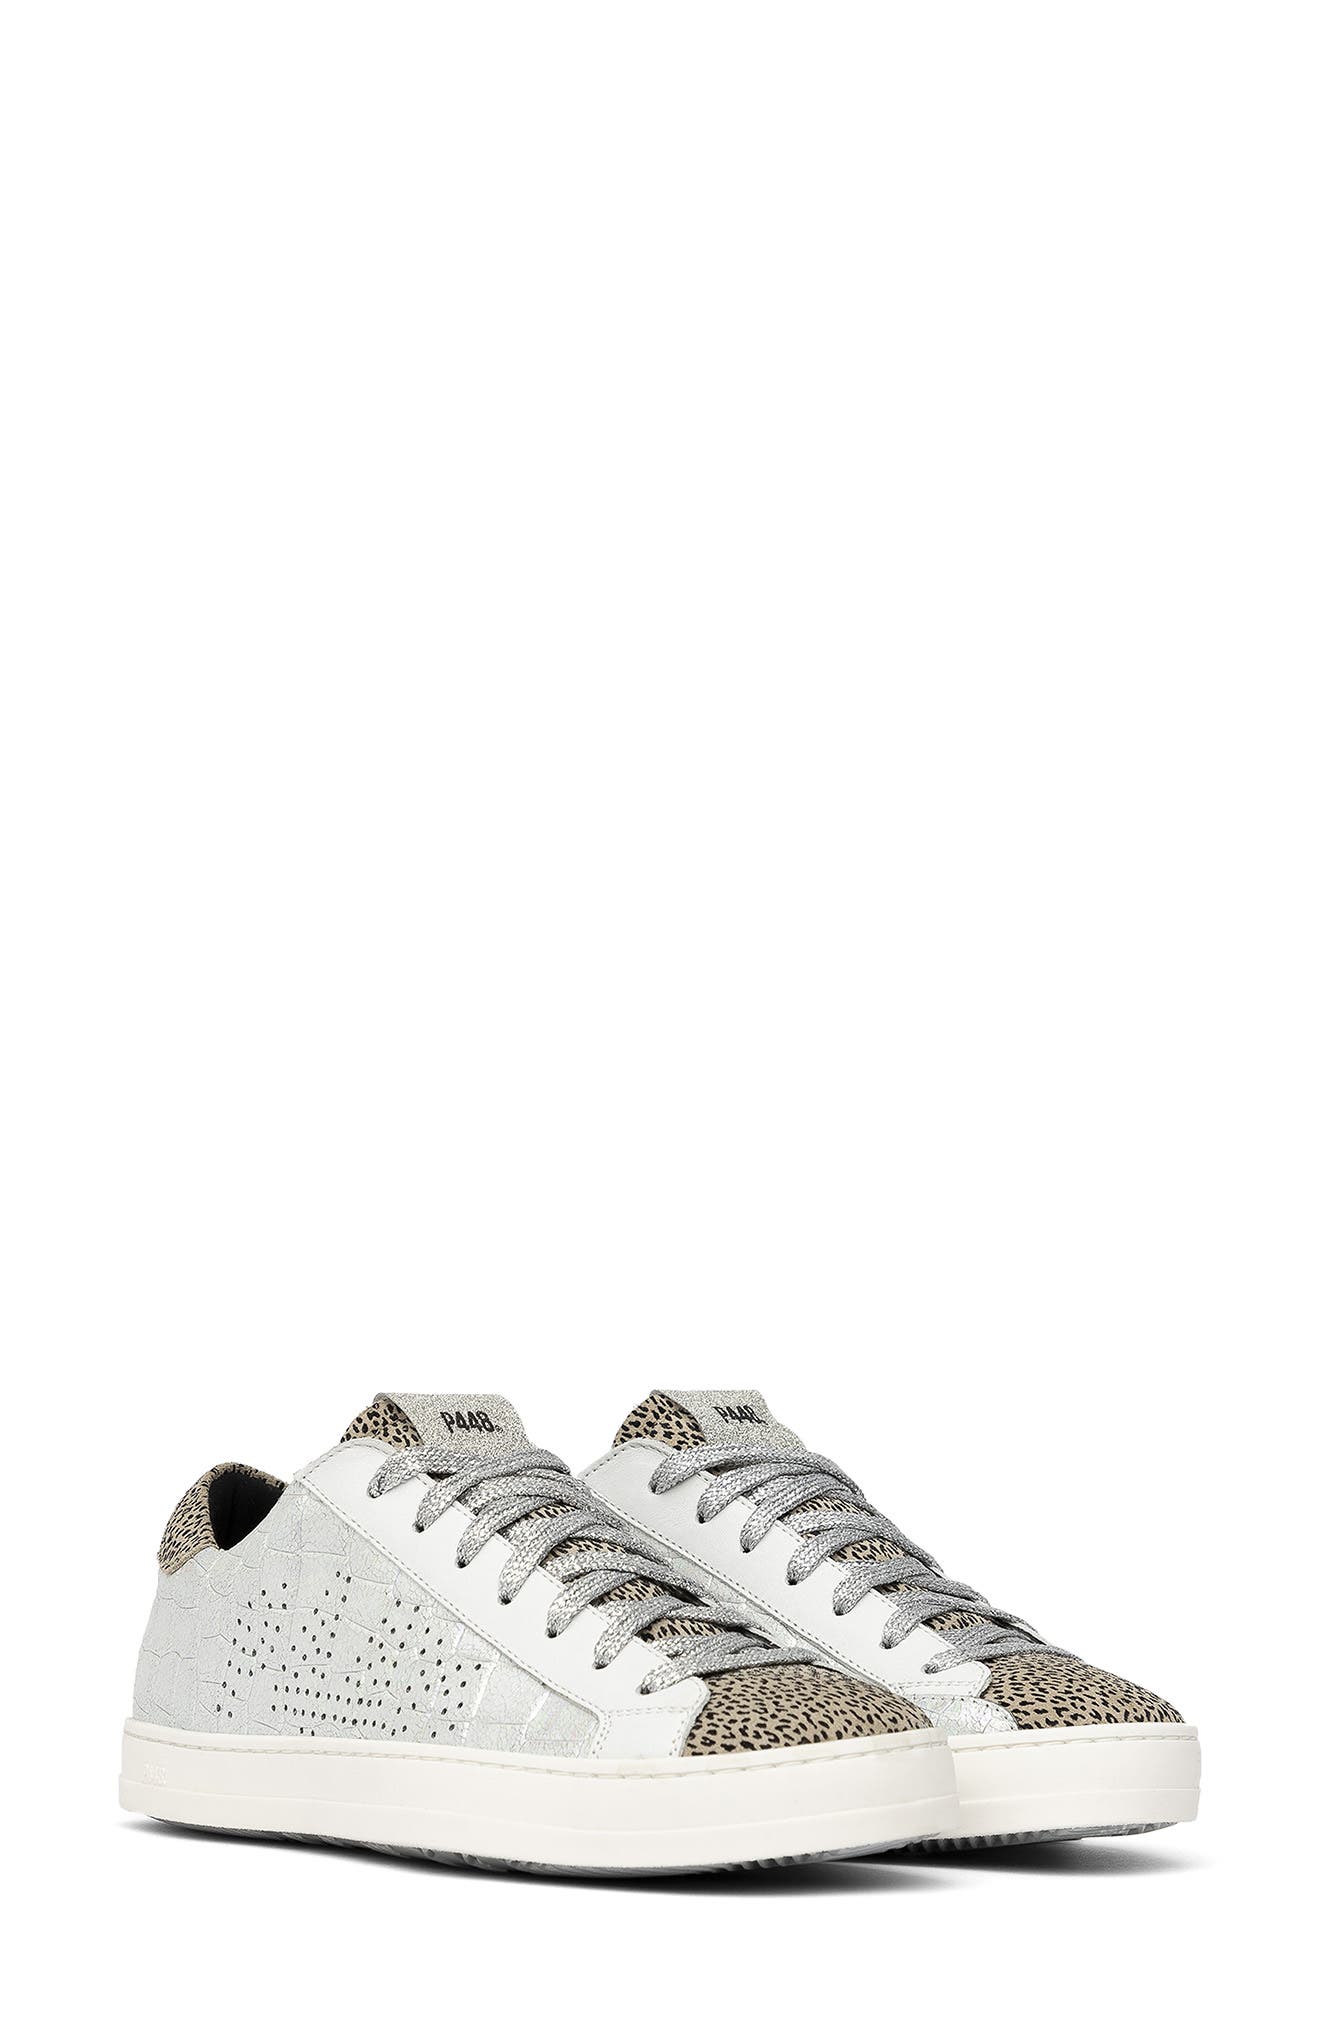 p448 sneakers on sale